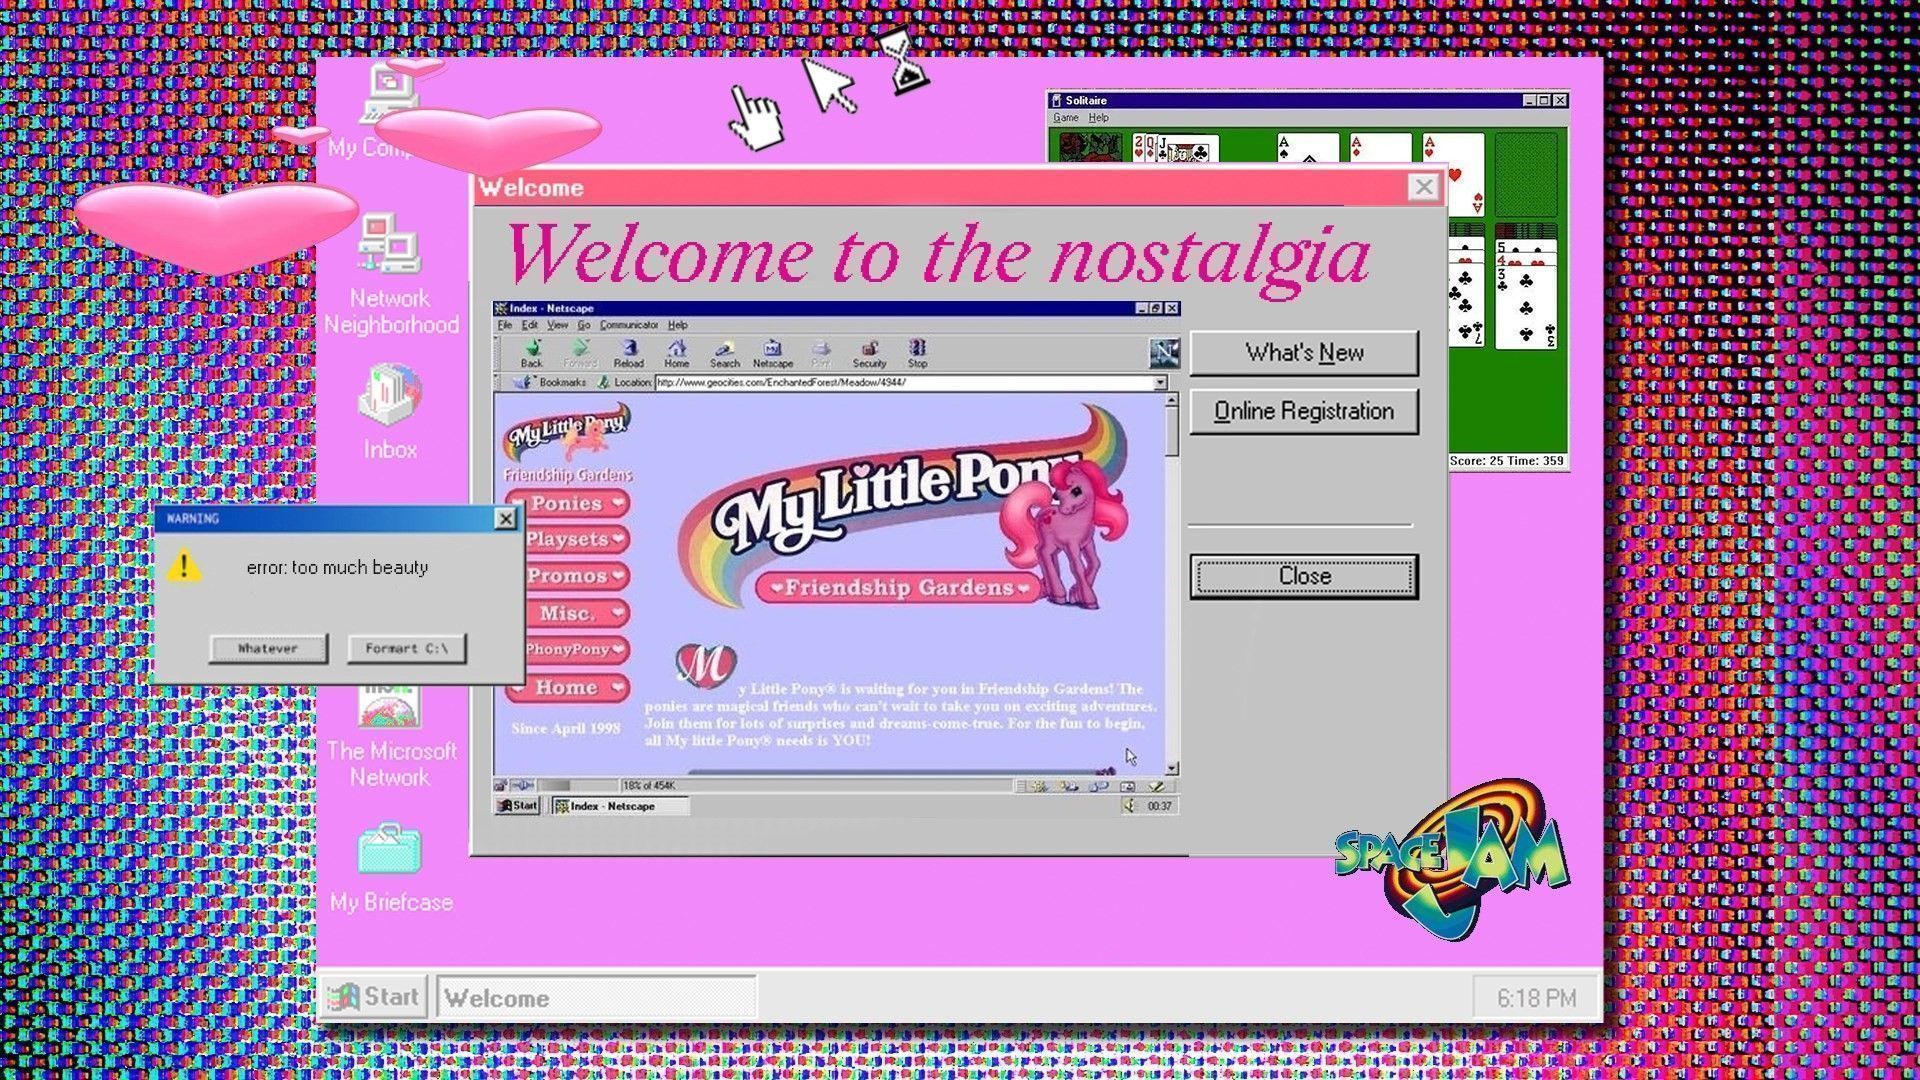 Why are we all so obsessed with early web nostalgia?